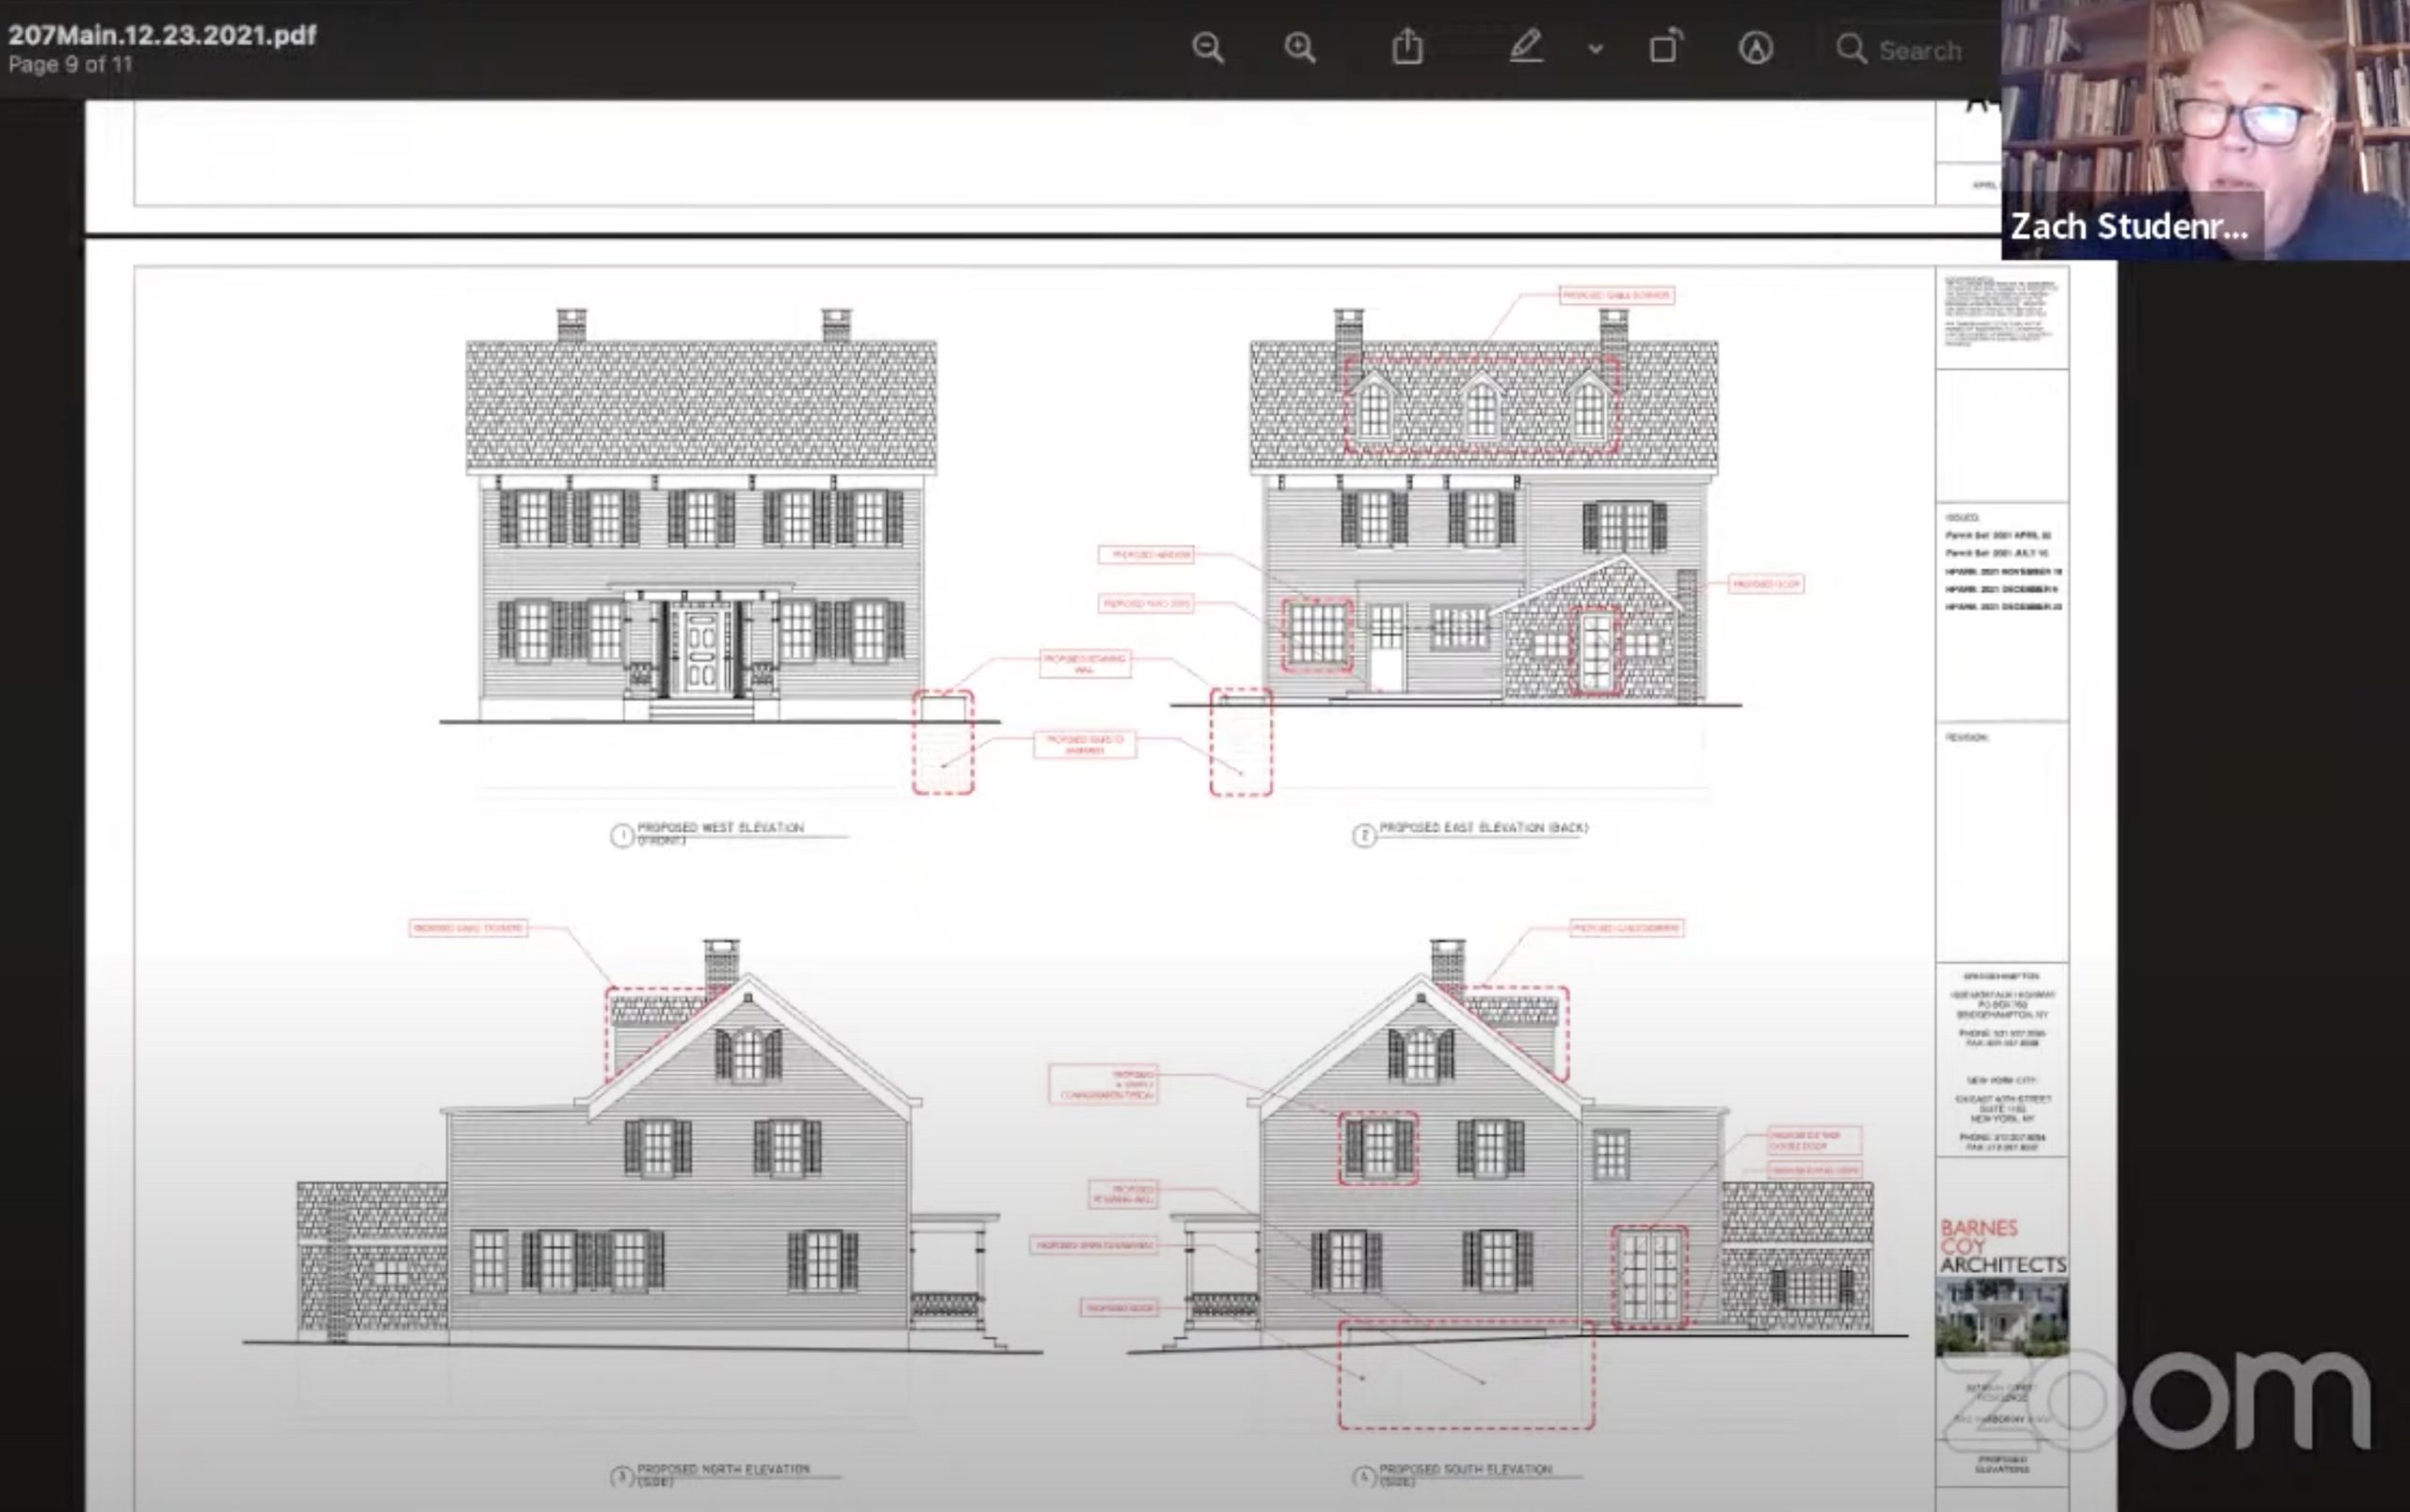 Architect Christopher Coy’s elevation of 207 Main Street with 6-over-6 window sashes in a screen shot from the December 23 Zoom meeting of the Sag Harbor Historic Preservation and Architectural Review Board. The inset shows Zachary Studenroth, the board’s historic architectural consultant.